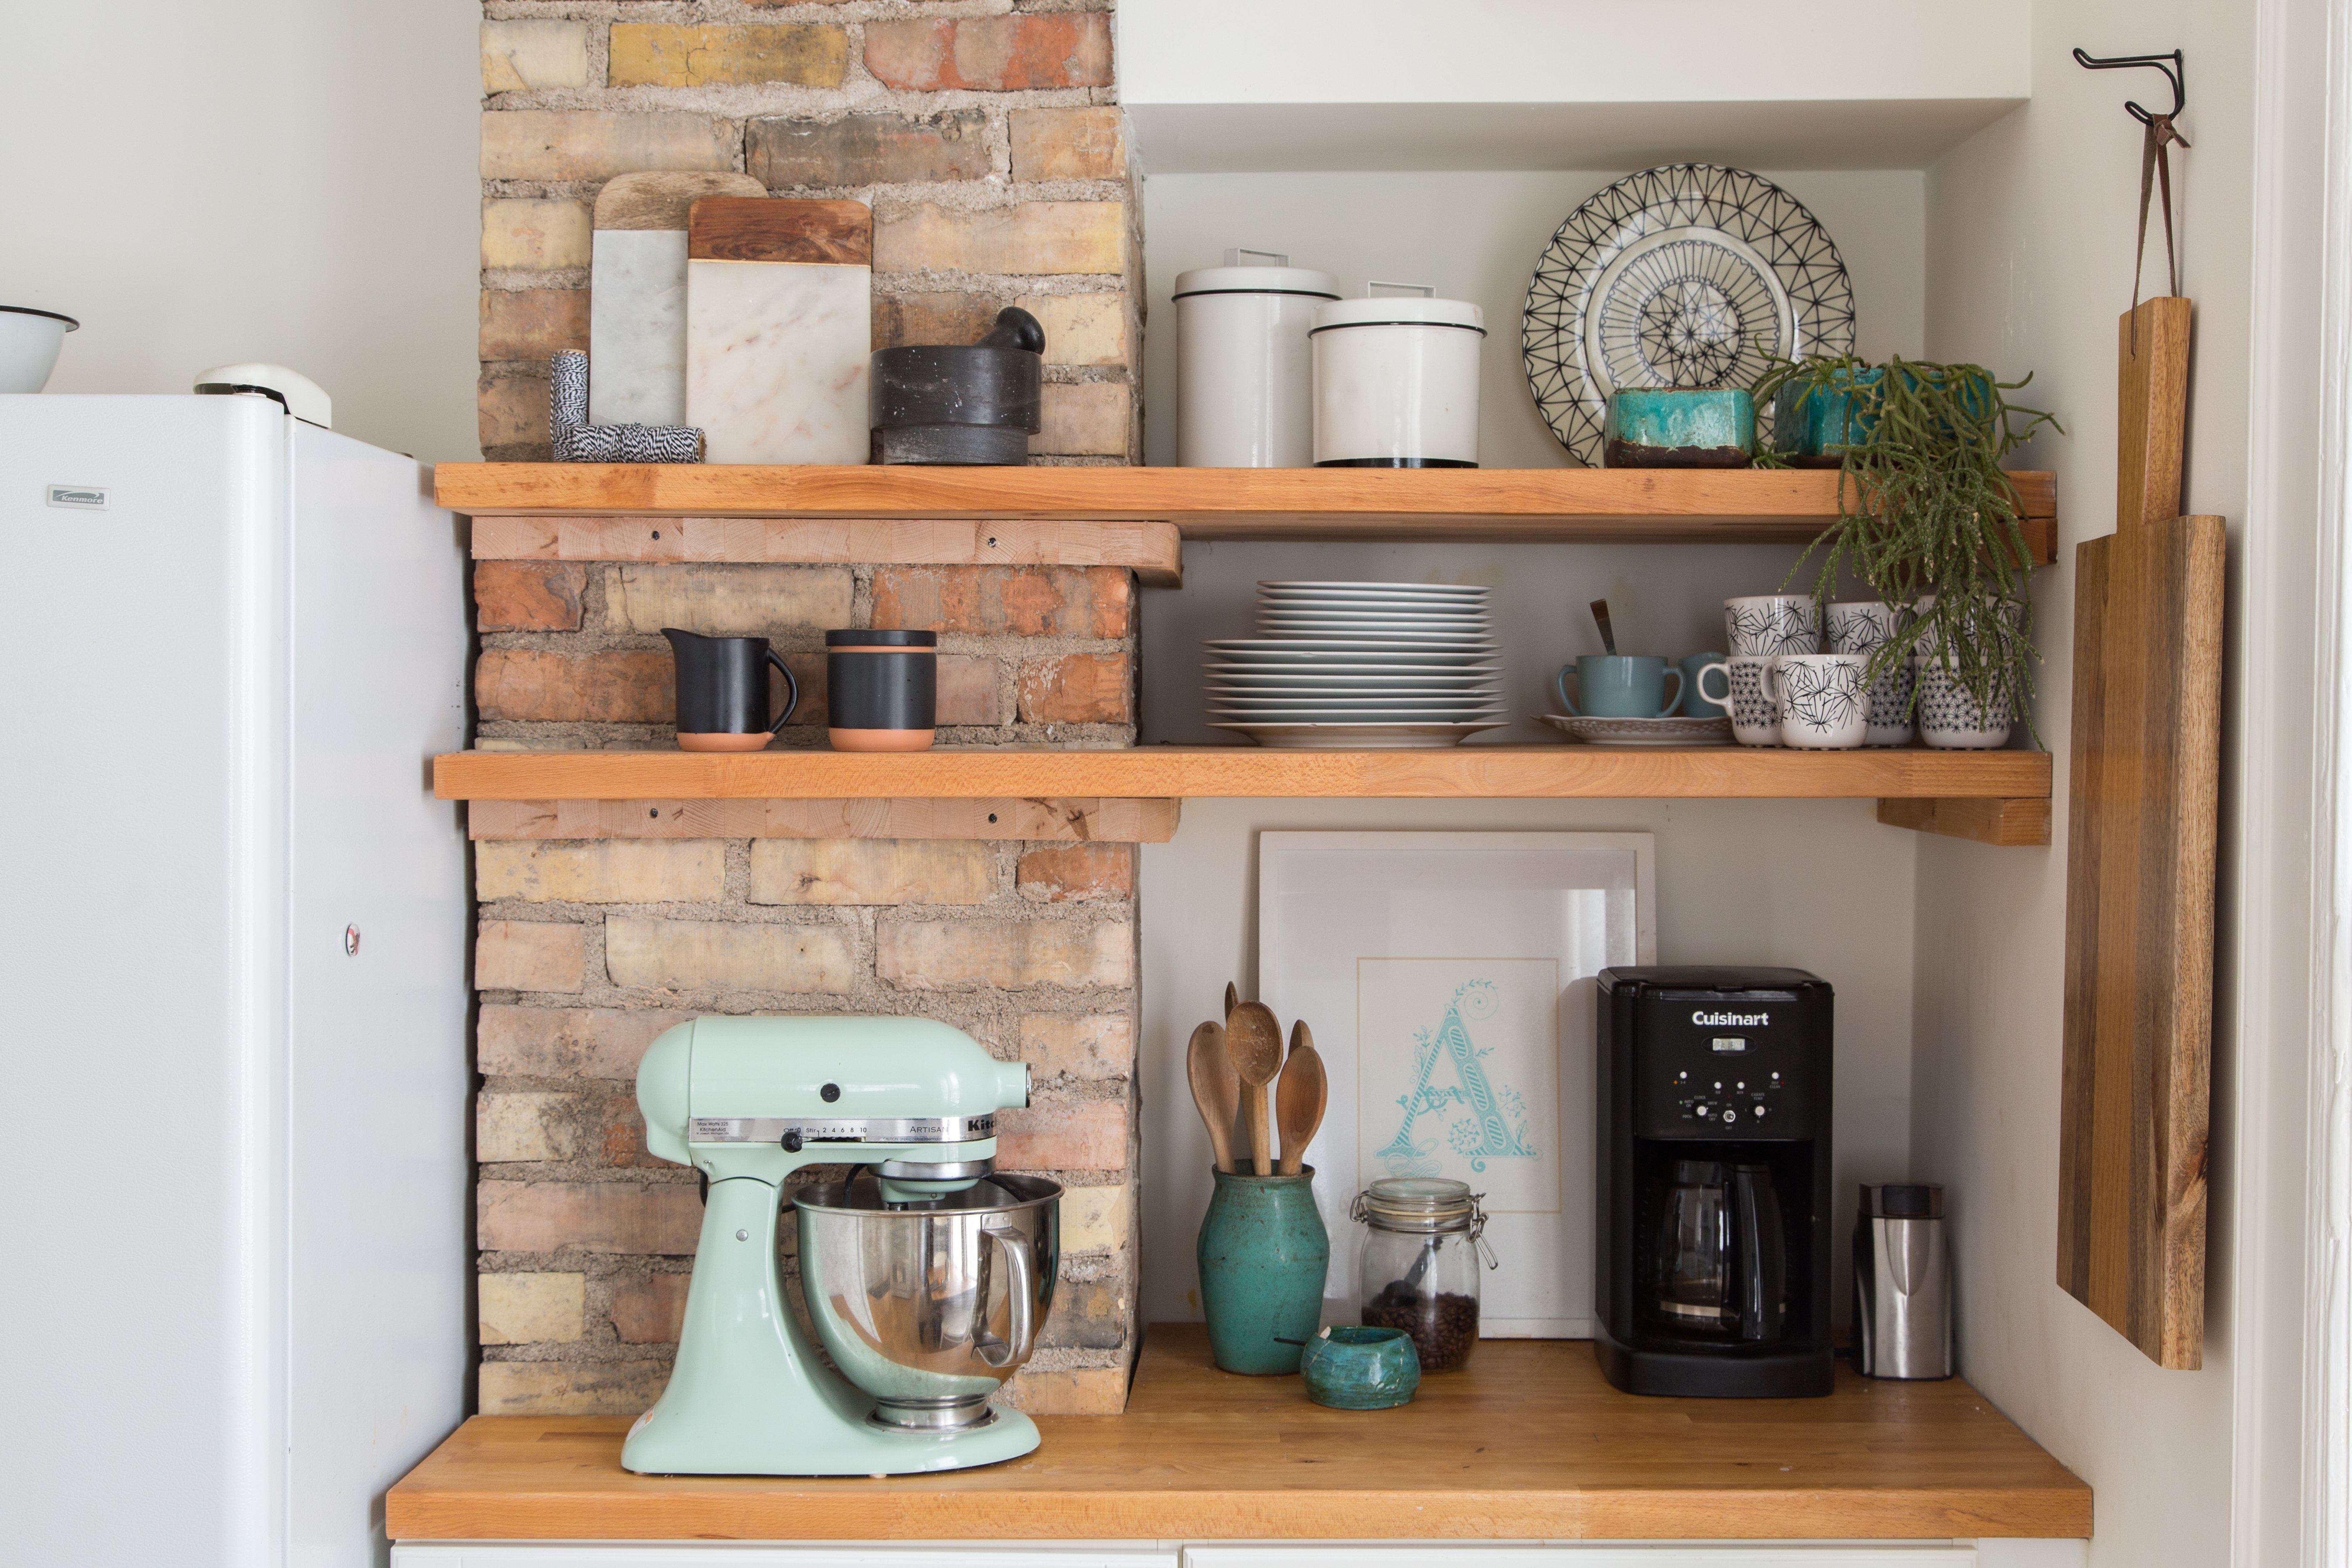 Kitchen Shelving 5 of the most gorgeous tiny kitchens with open shelving | kitchn SHGGWQV